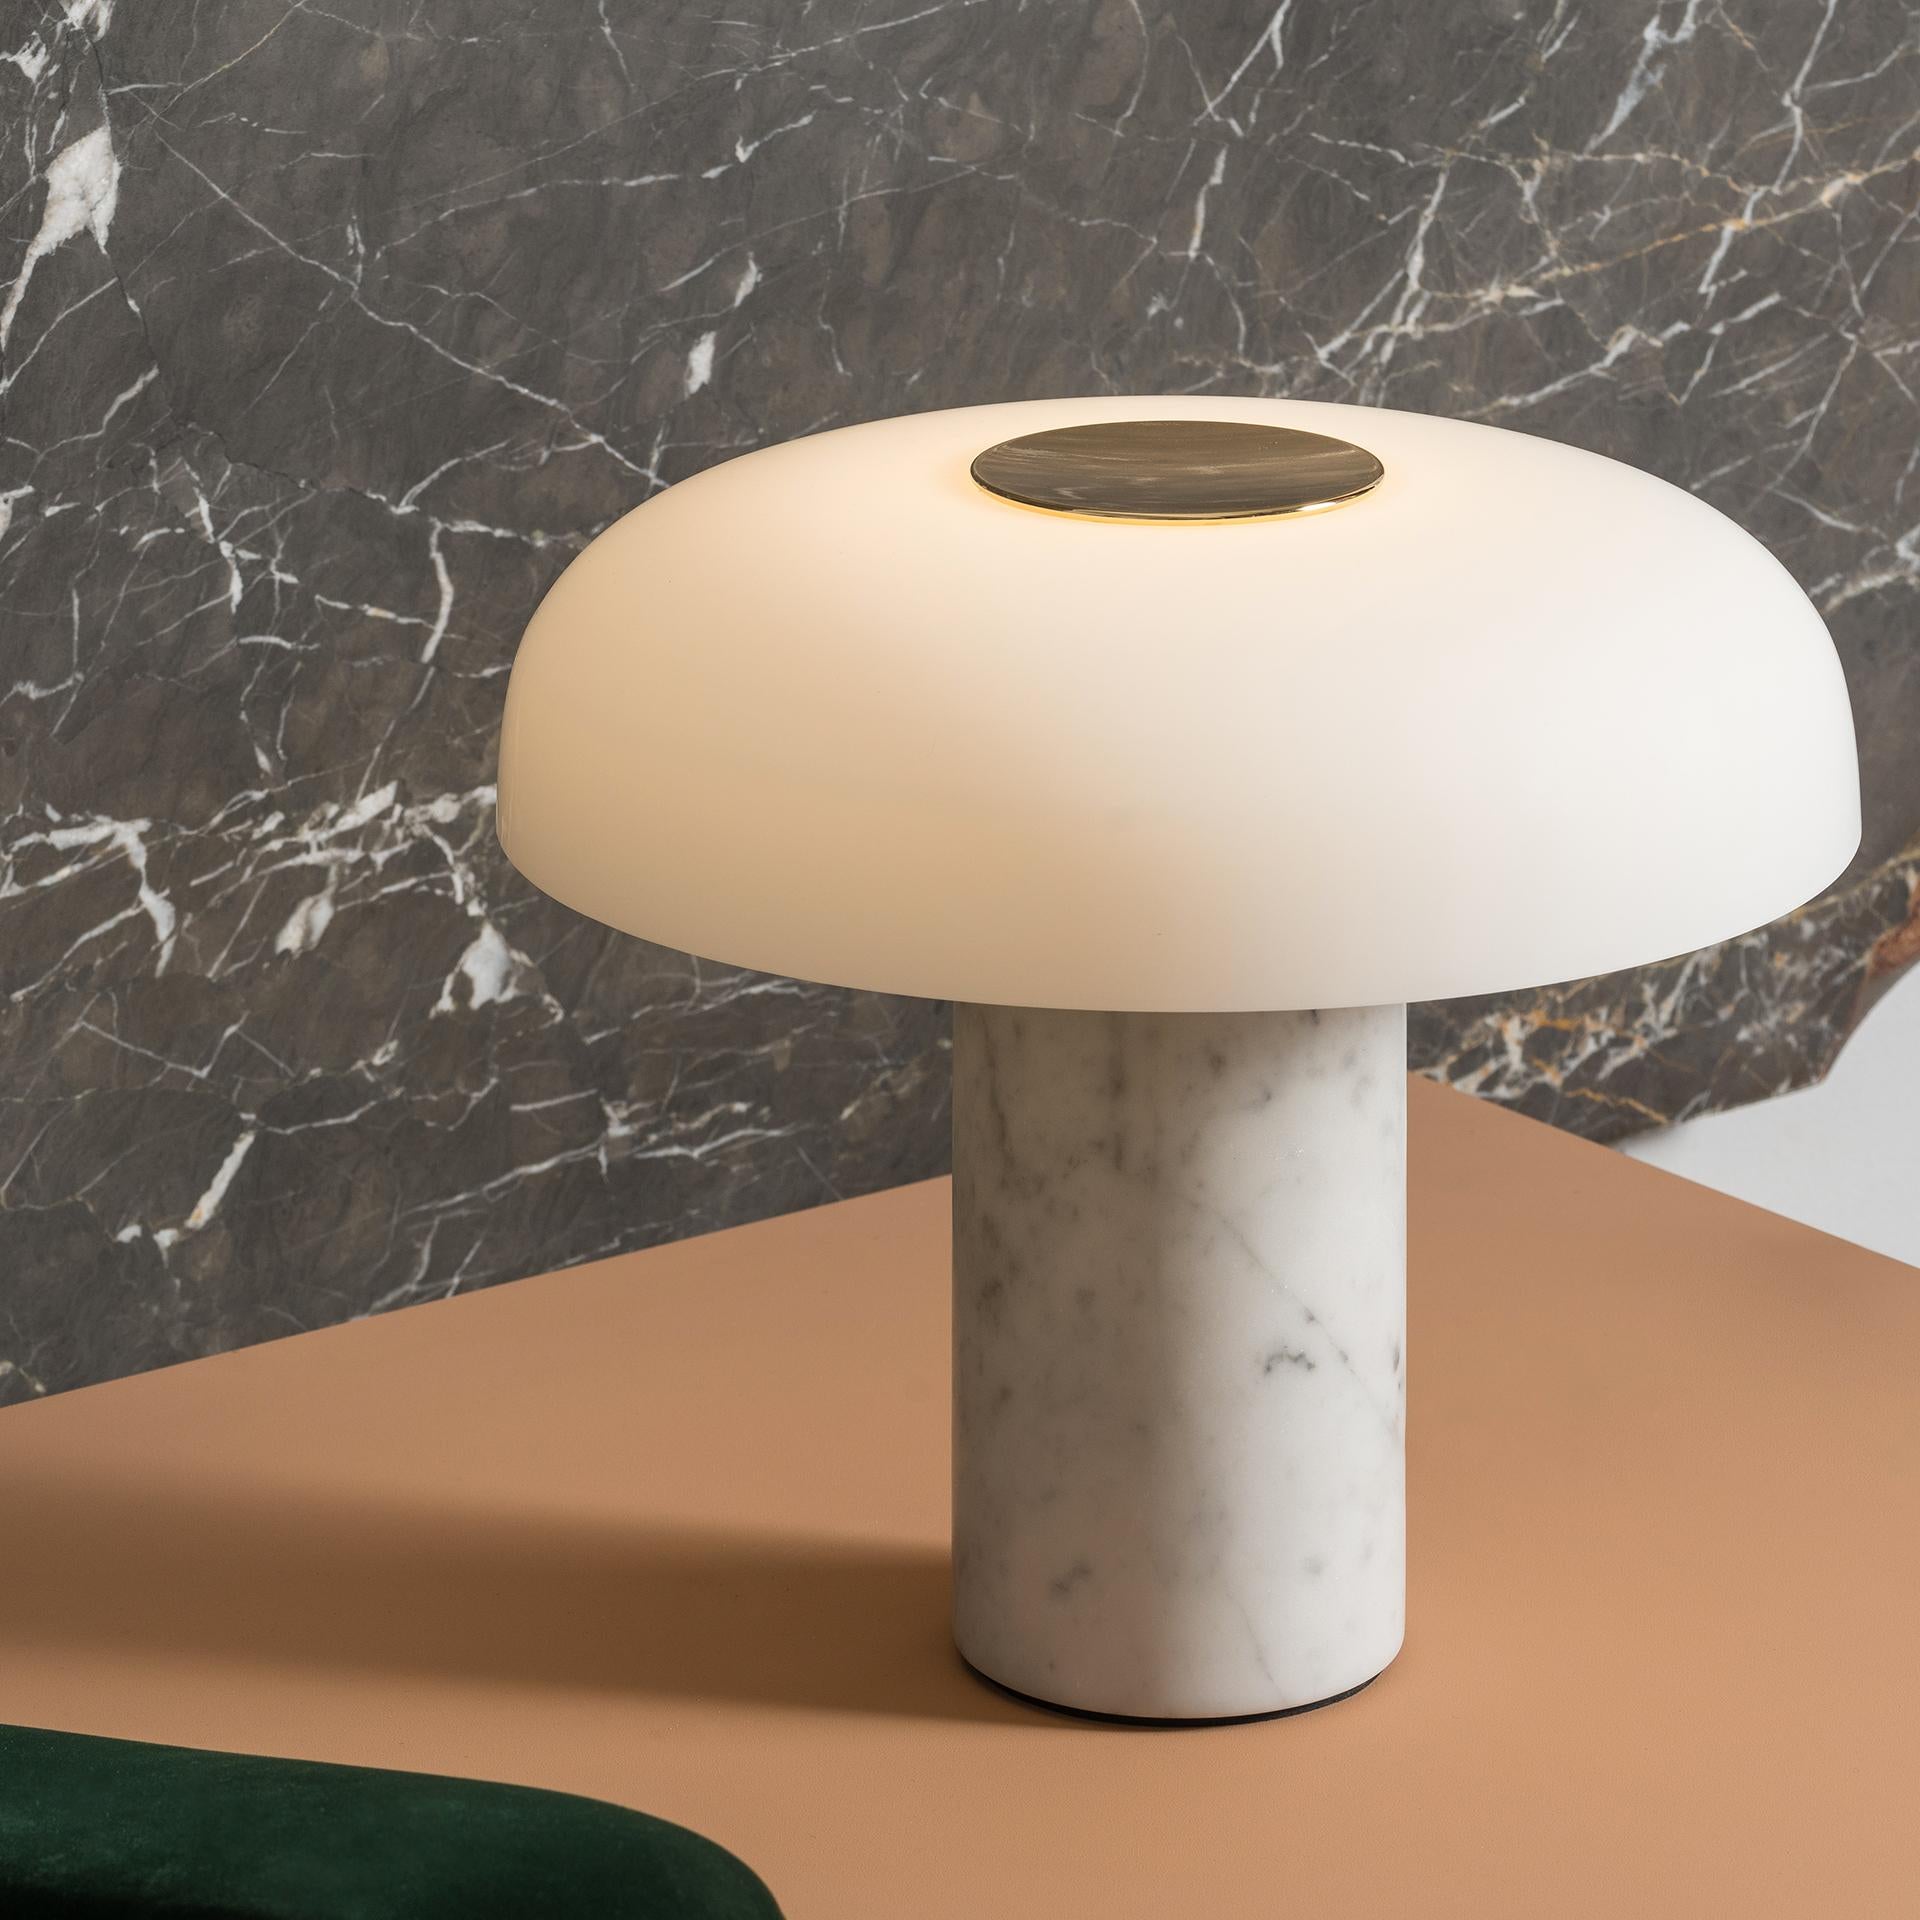 Studio Buratti 'Tropico' white marble & glass table lamp for Fontana Arte. Executed in high quality marble, thick etched hand blown opaline glass and galvanized gold colored metal. The 